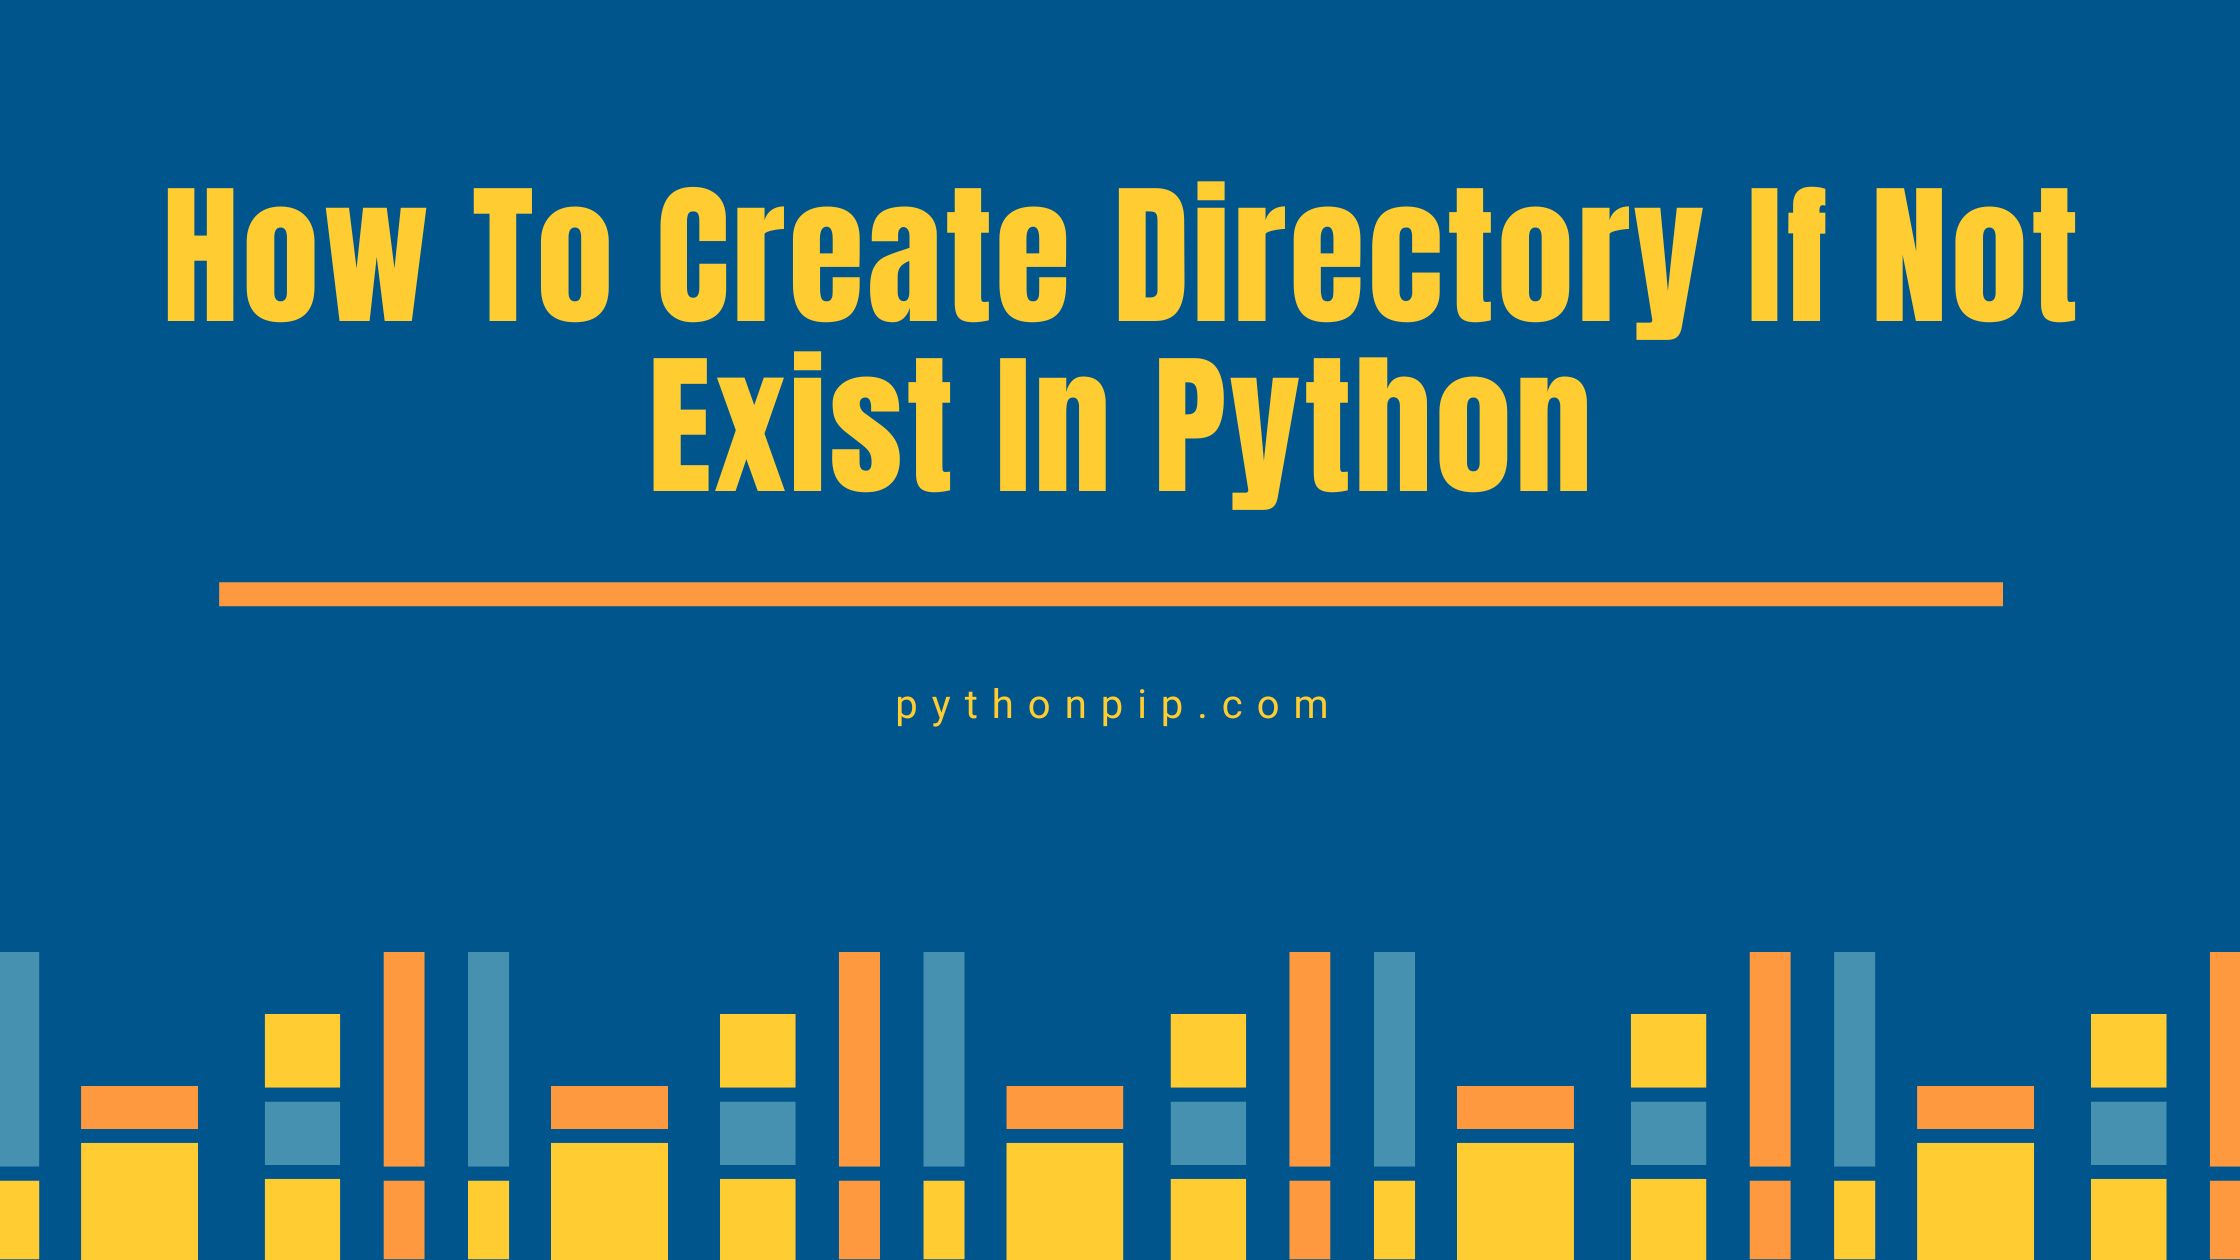 How To Create A Directory If Not Exist In Python - Pythonpip.Com